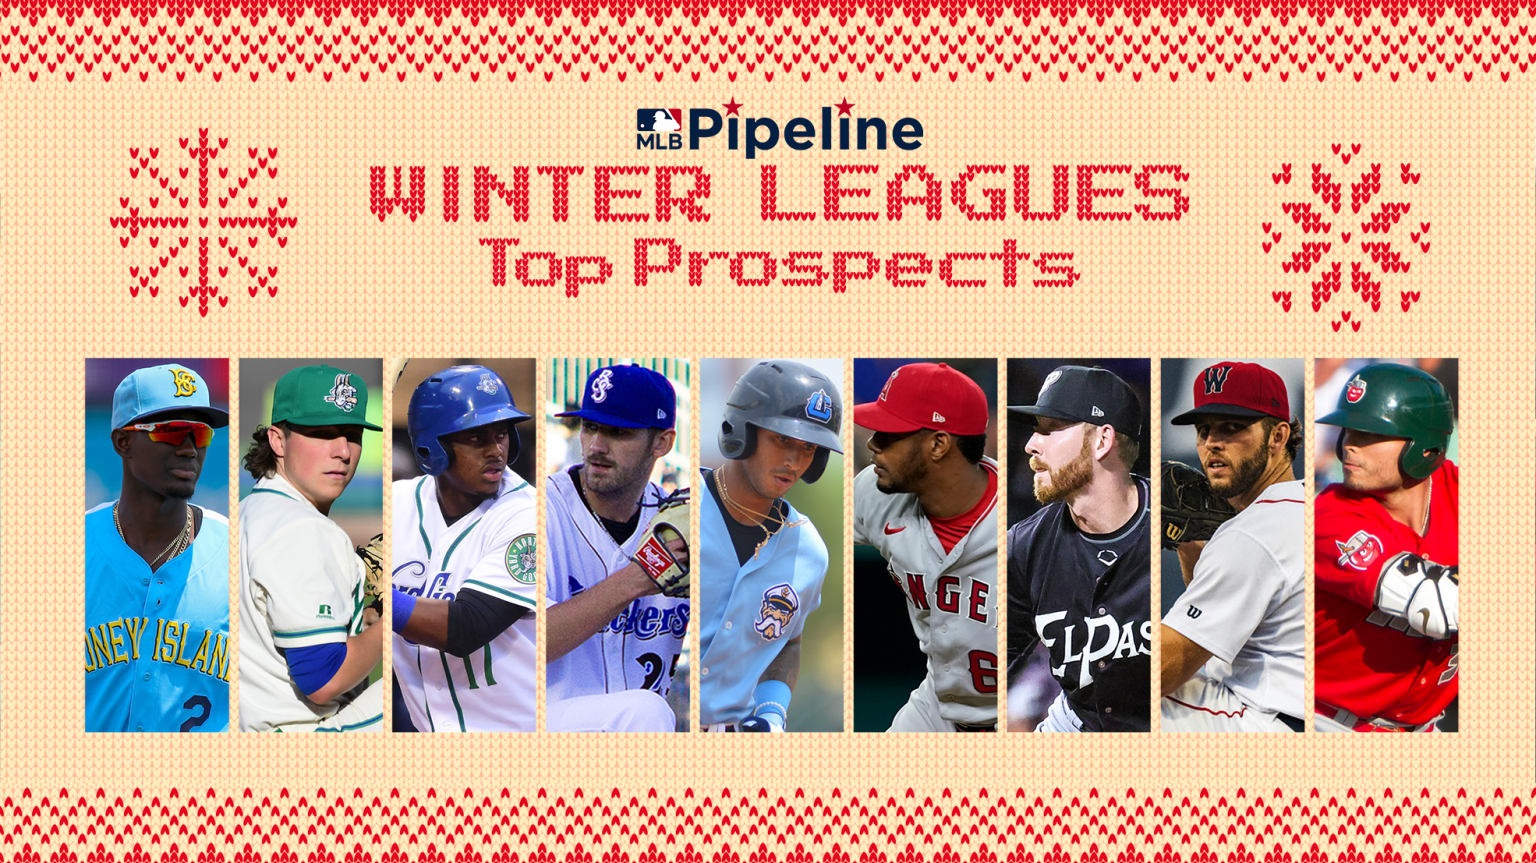 Winter Leagues top prospects